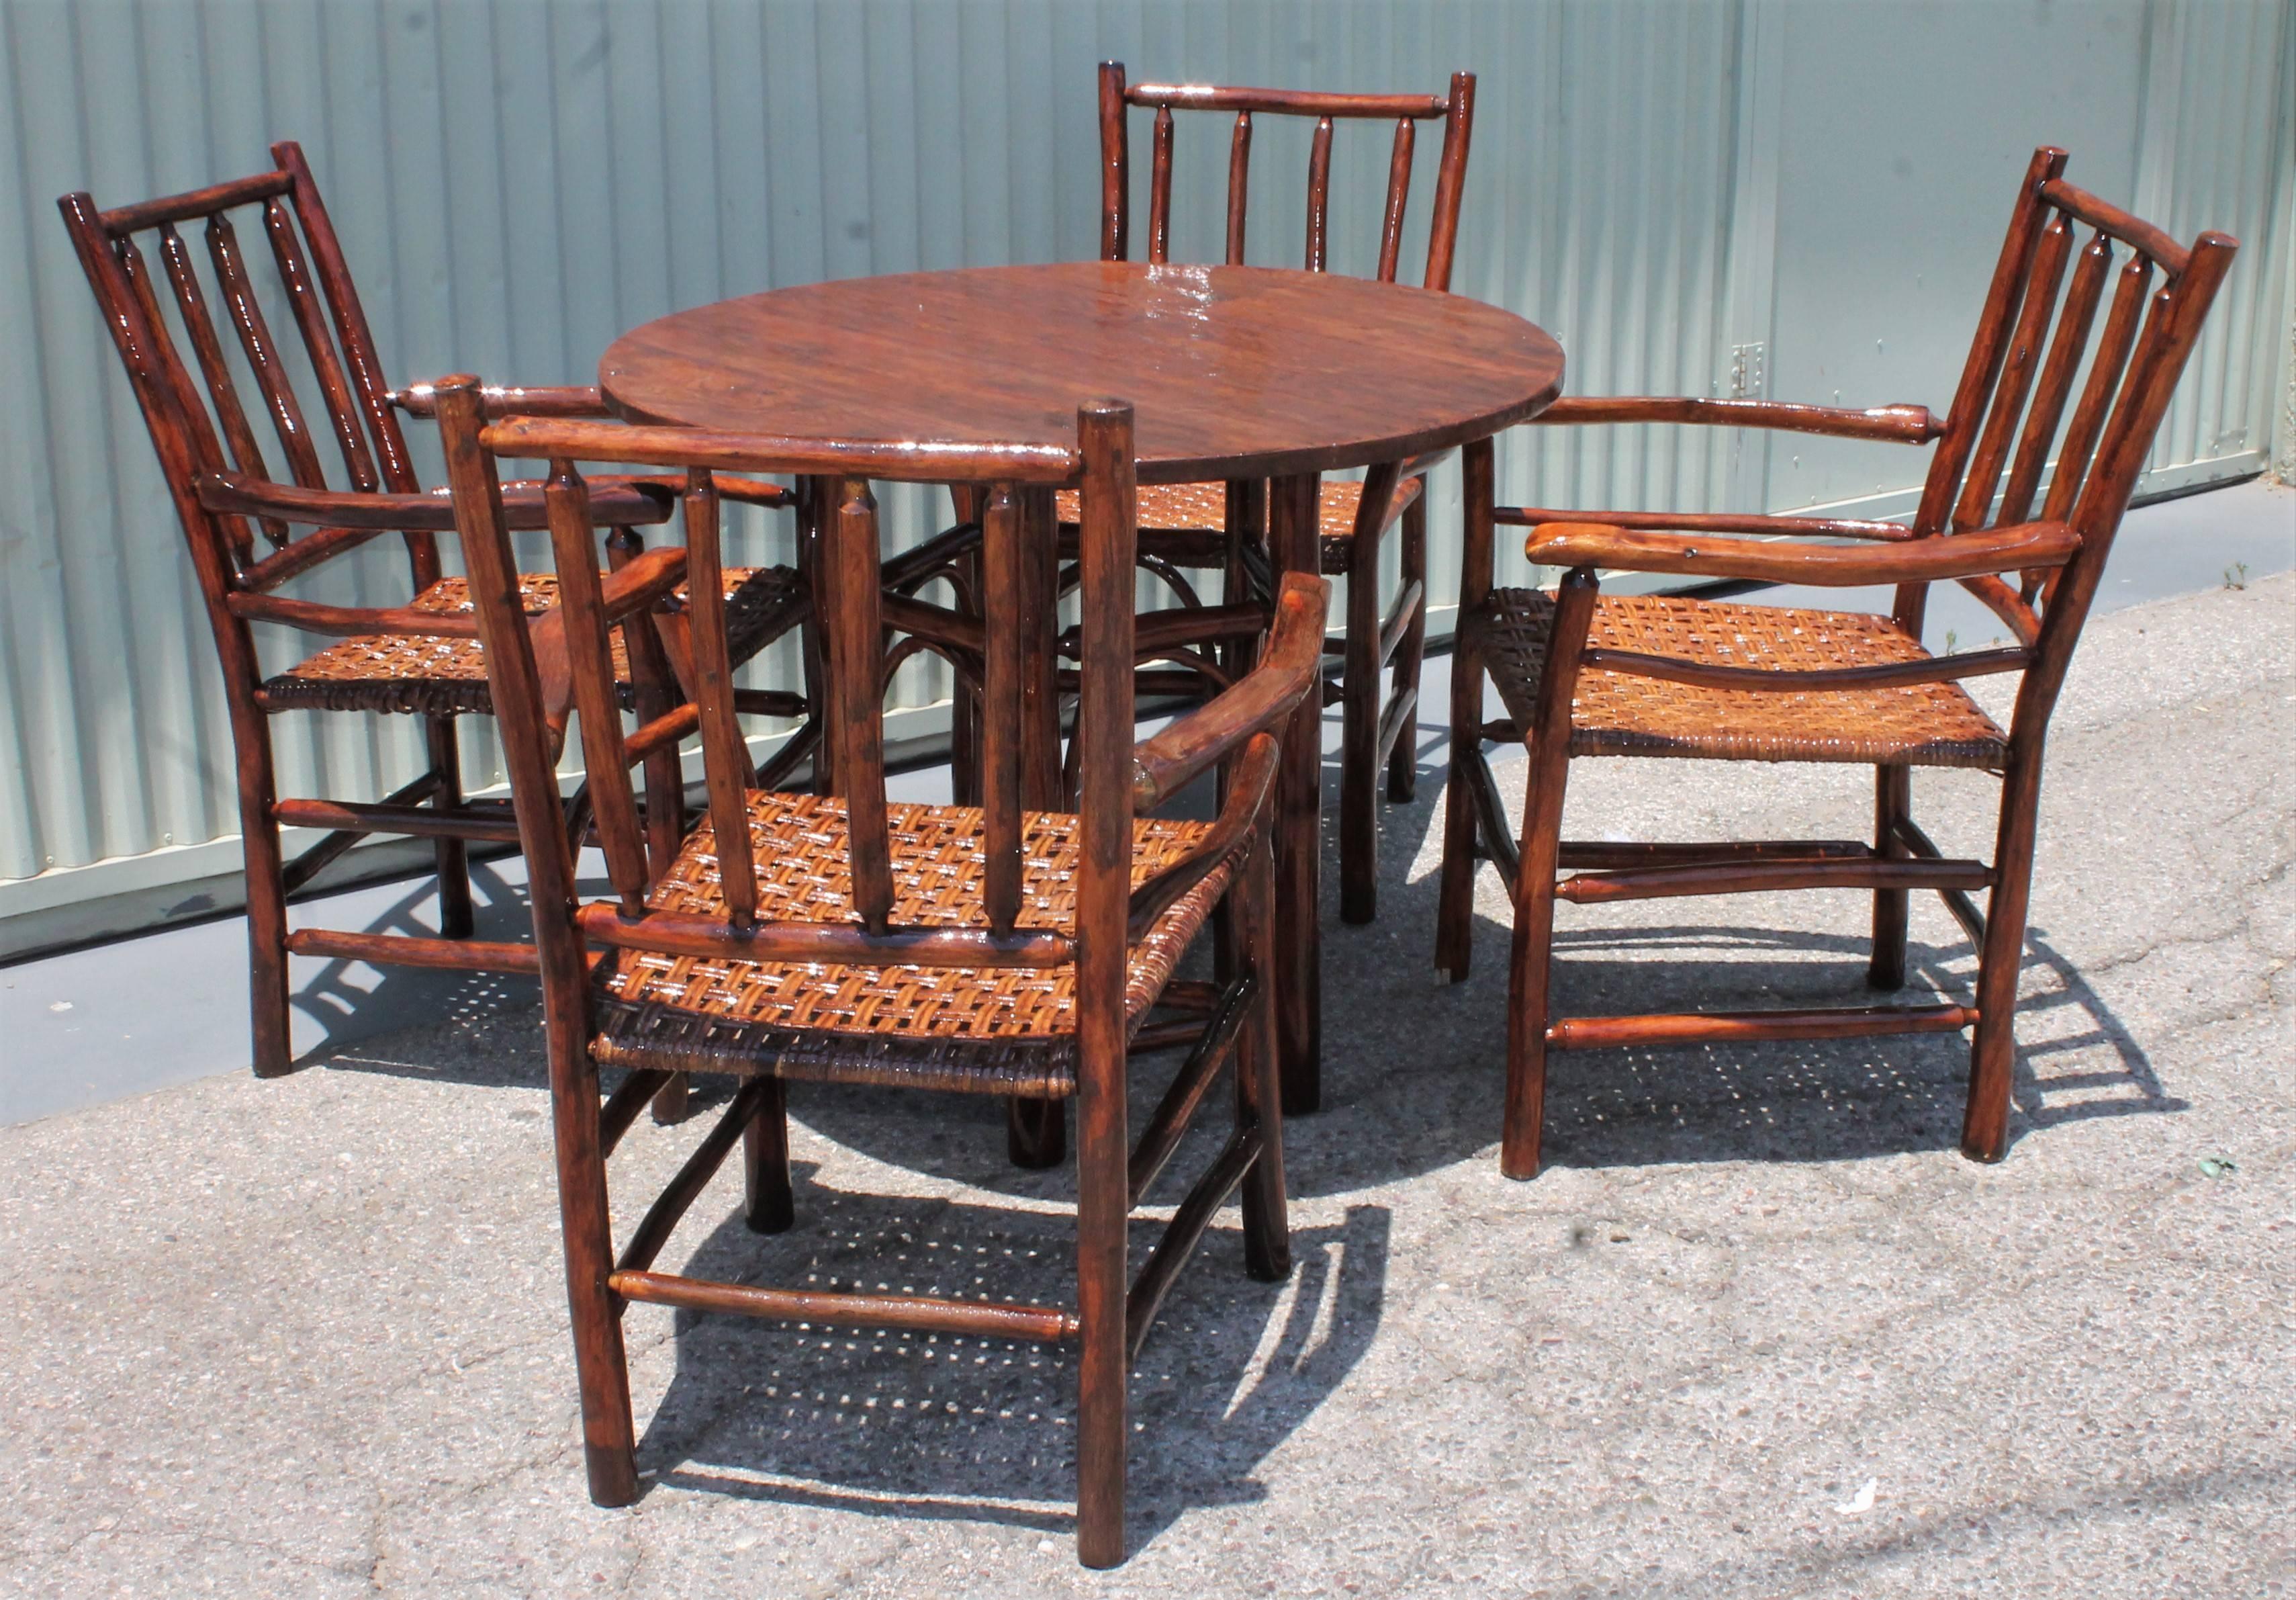 This amazing indoor / outdoor signed Old Hickory Table & chairs is in amazing and sturdy condition with a nice mellow patina. The entire set has a coat of boat varnish, outdoor protector on it. This is so it is protected from the rain or outdoor